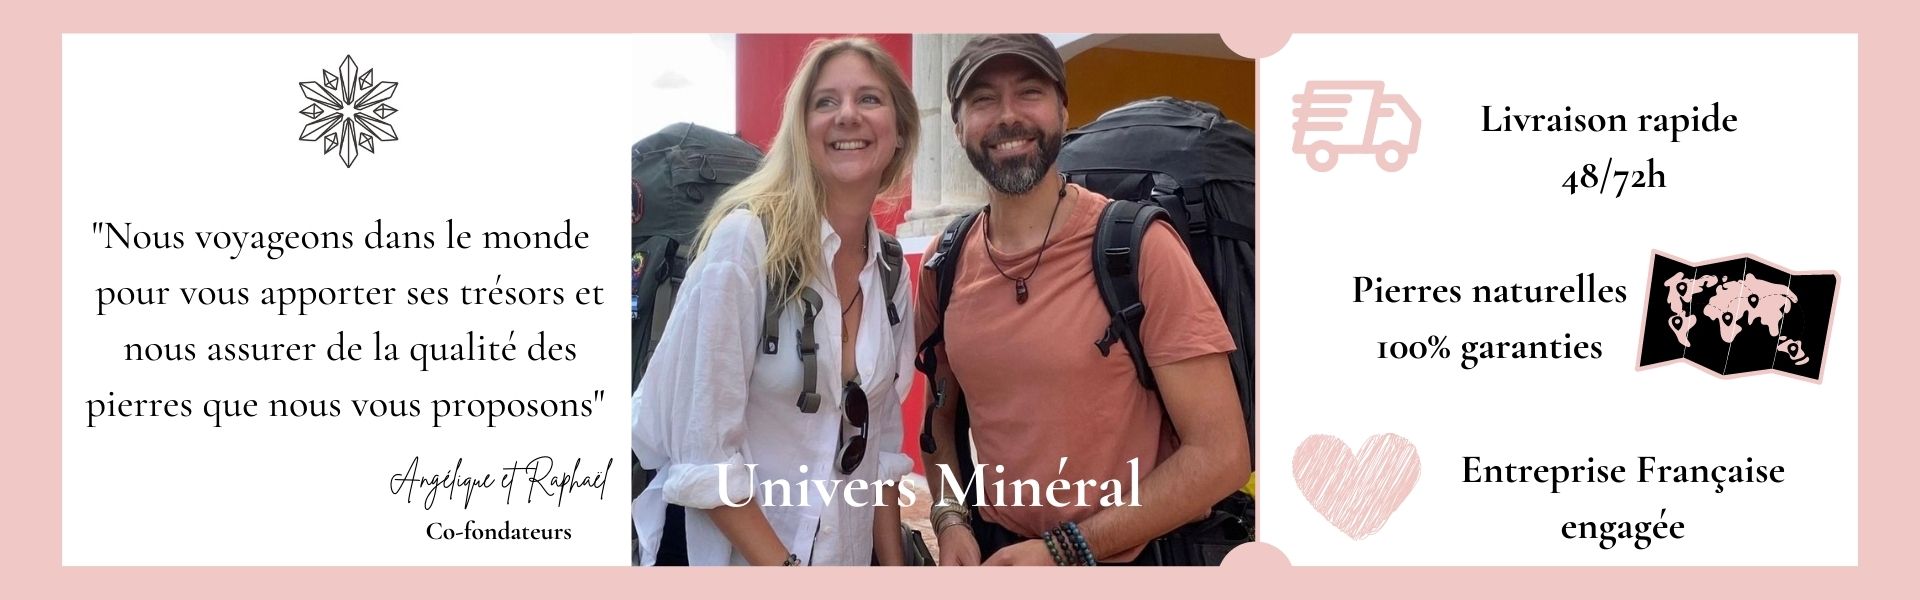 univers mineral